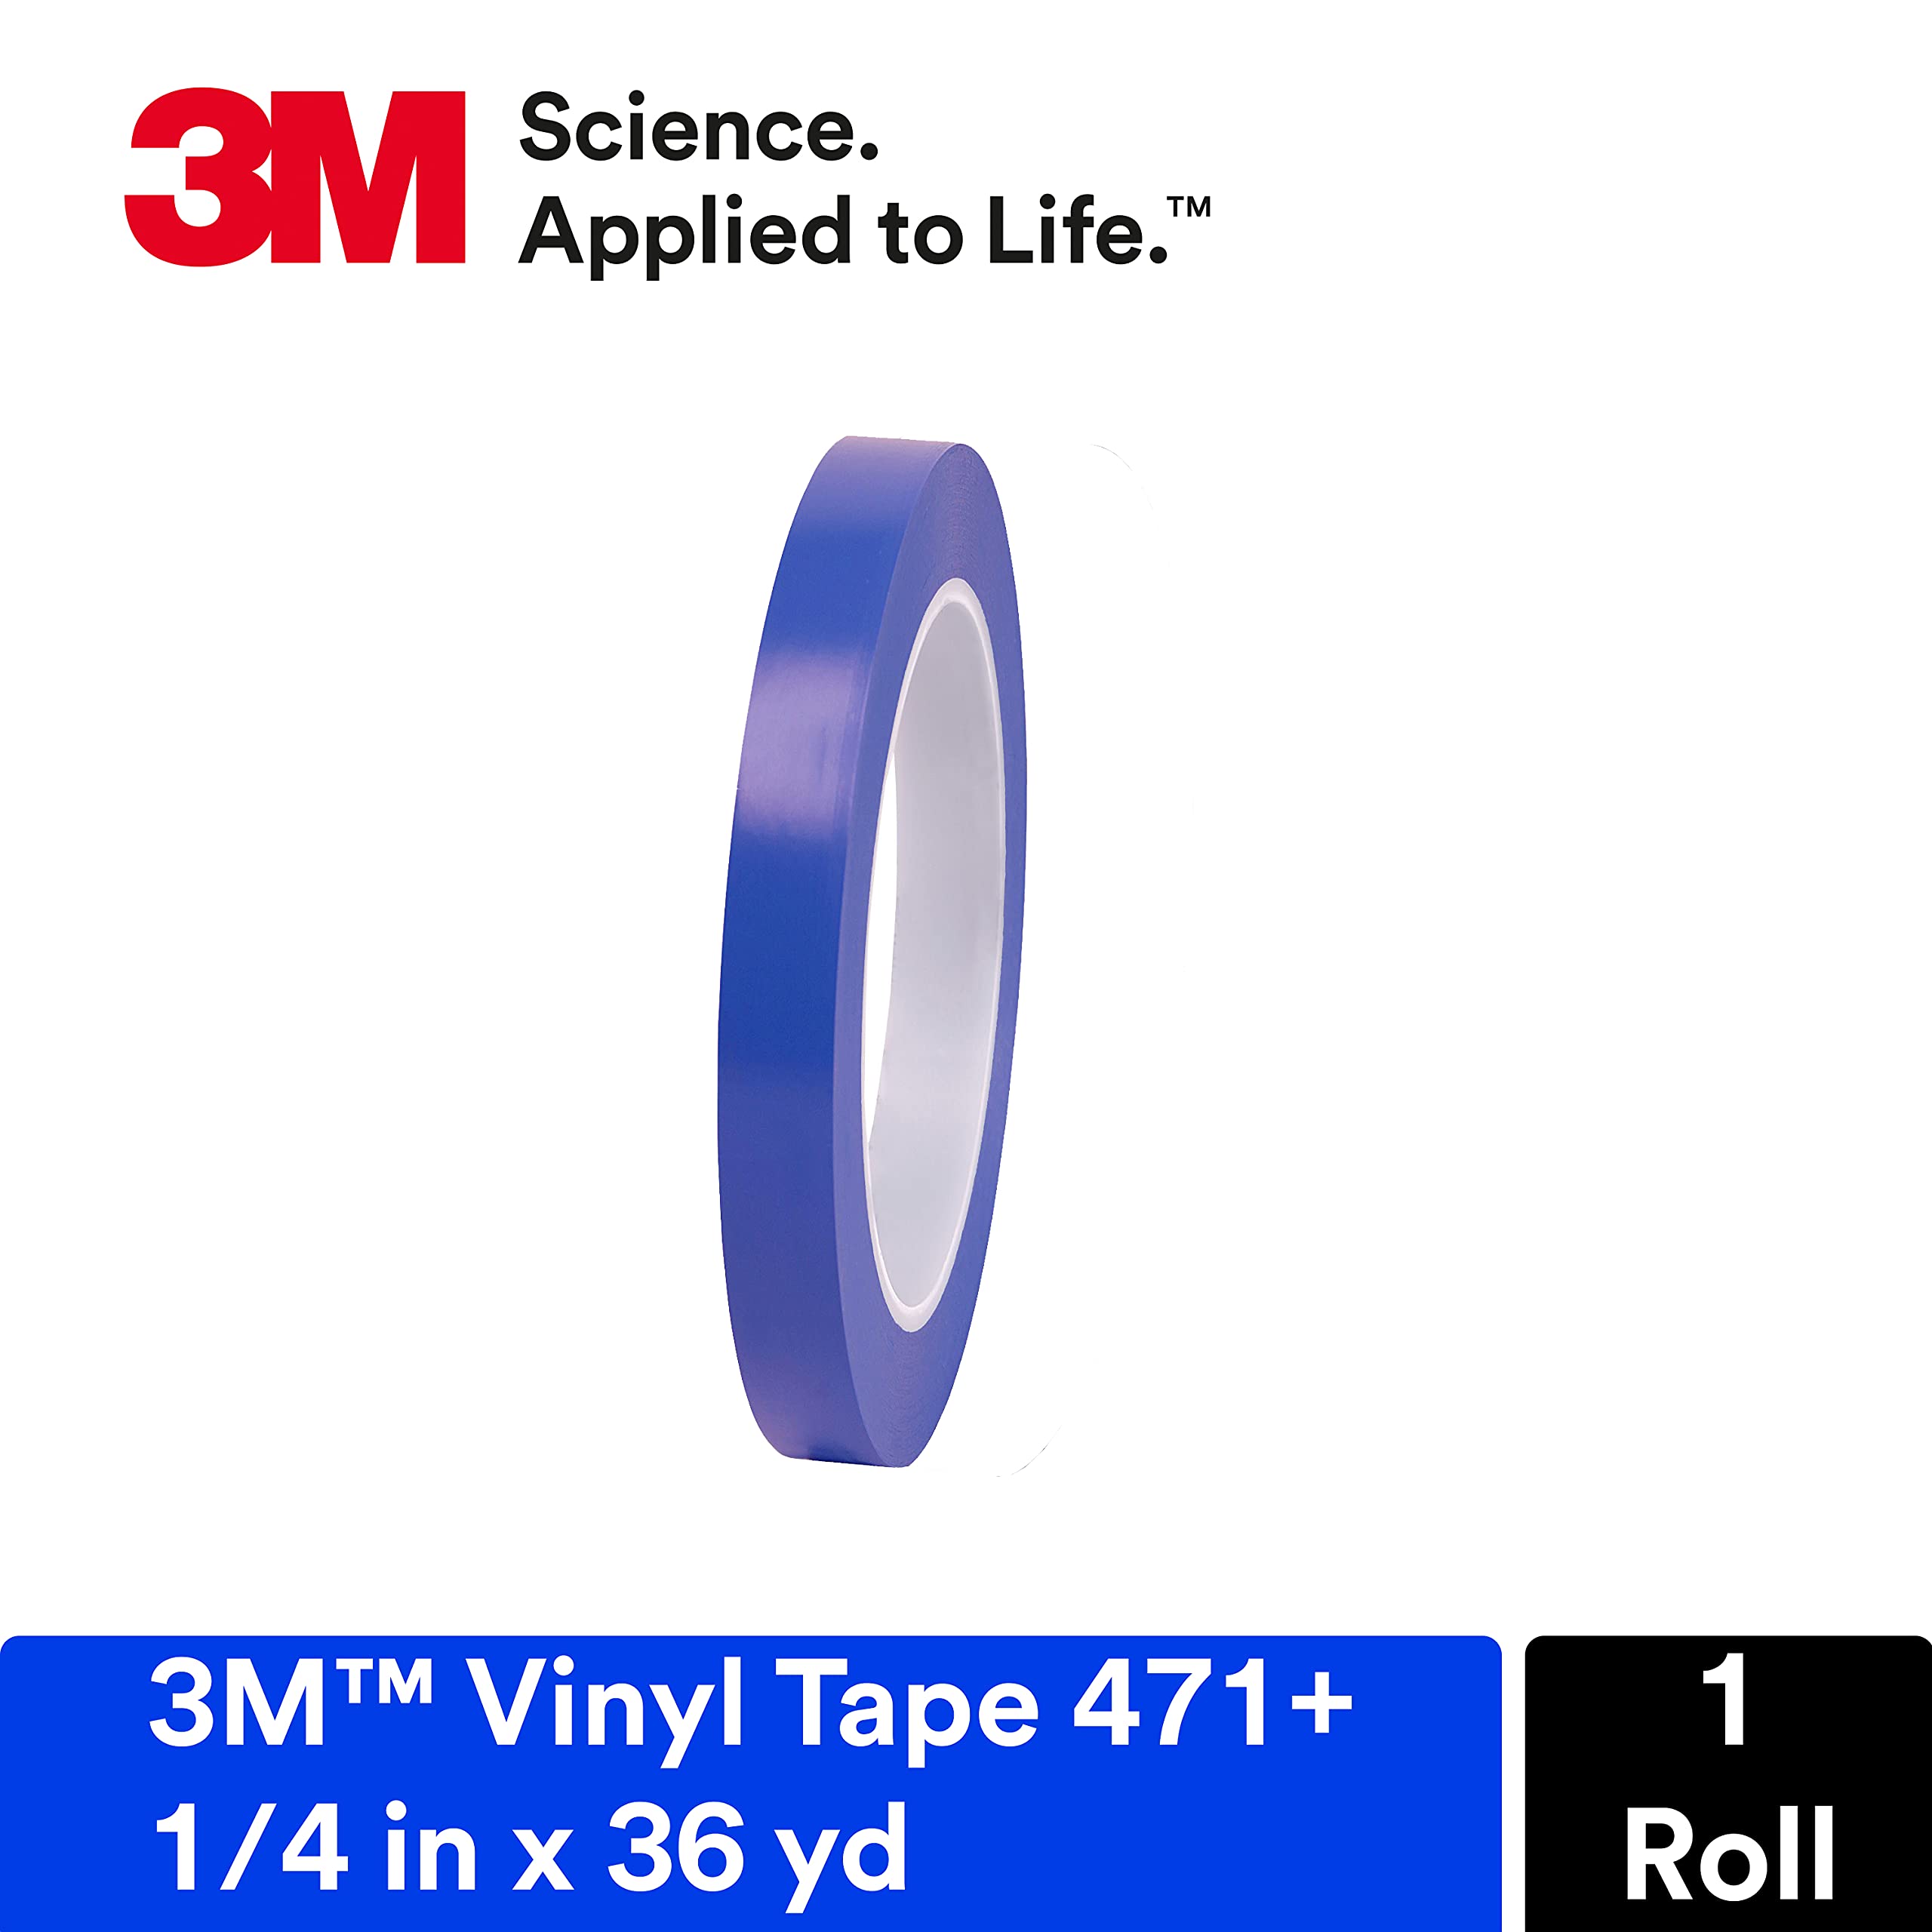 3M Vinyl Tape 471+, 1/4 in x 36 yd, Indigo, 1 Roll, Fine Line Tape for Paint Masking Striping, Color Separation and Complex Designs, High-Temperature, Stretch